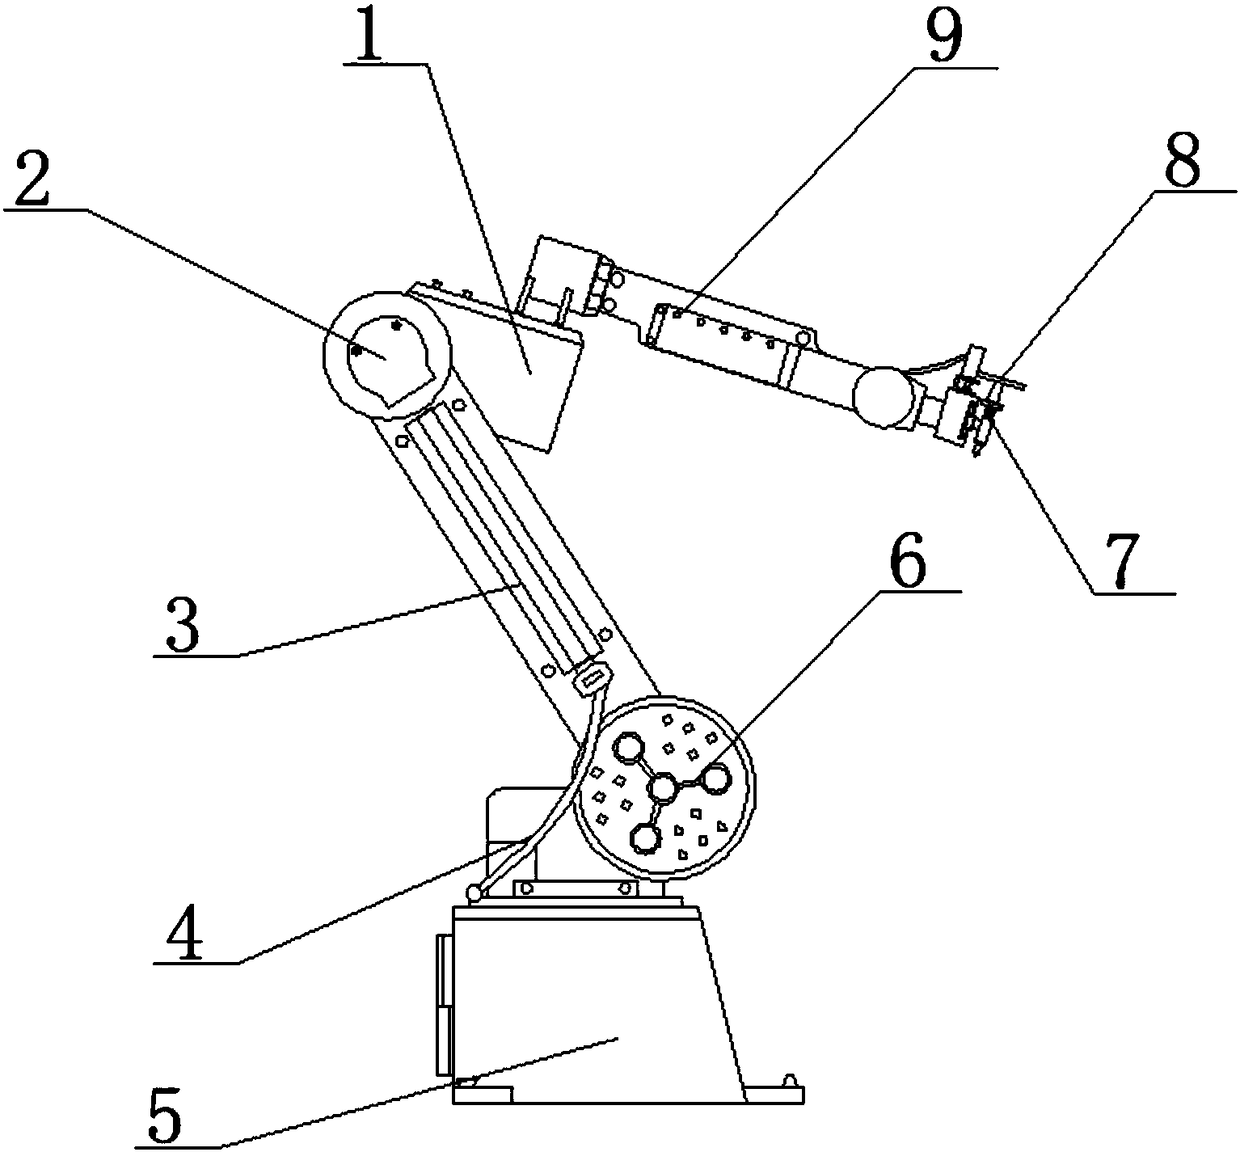 Medical mechanical arm for assisting in operations